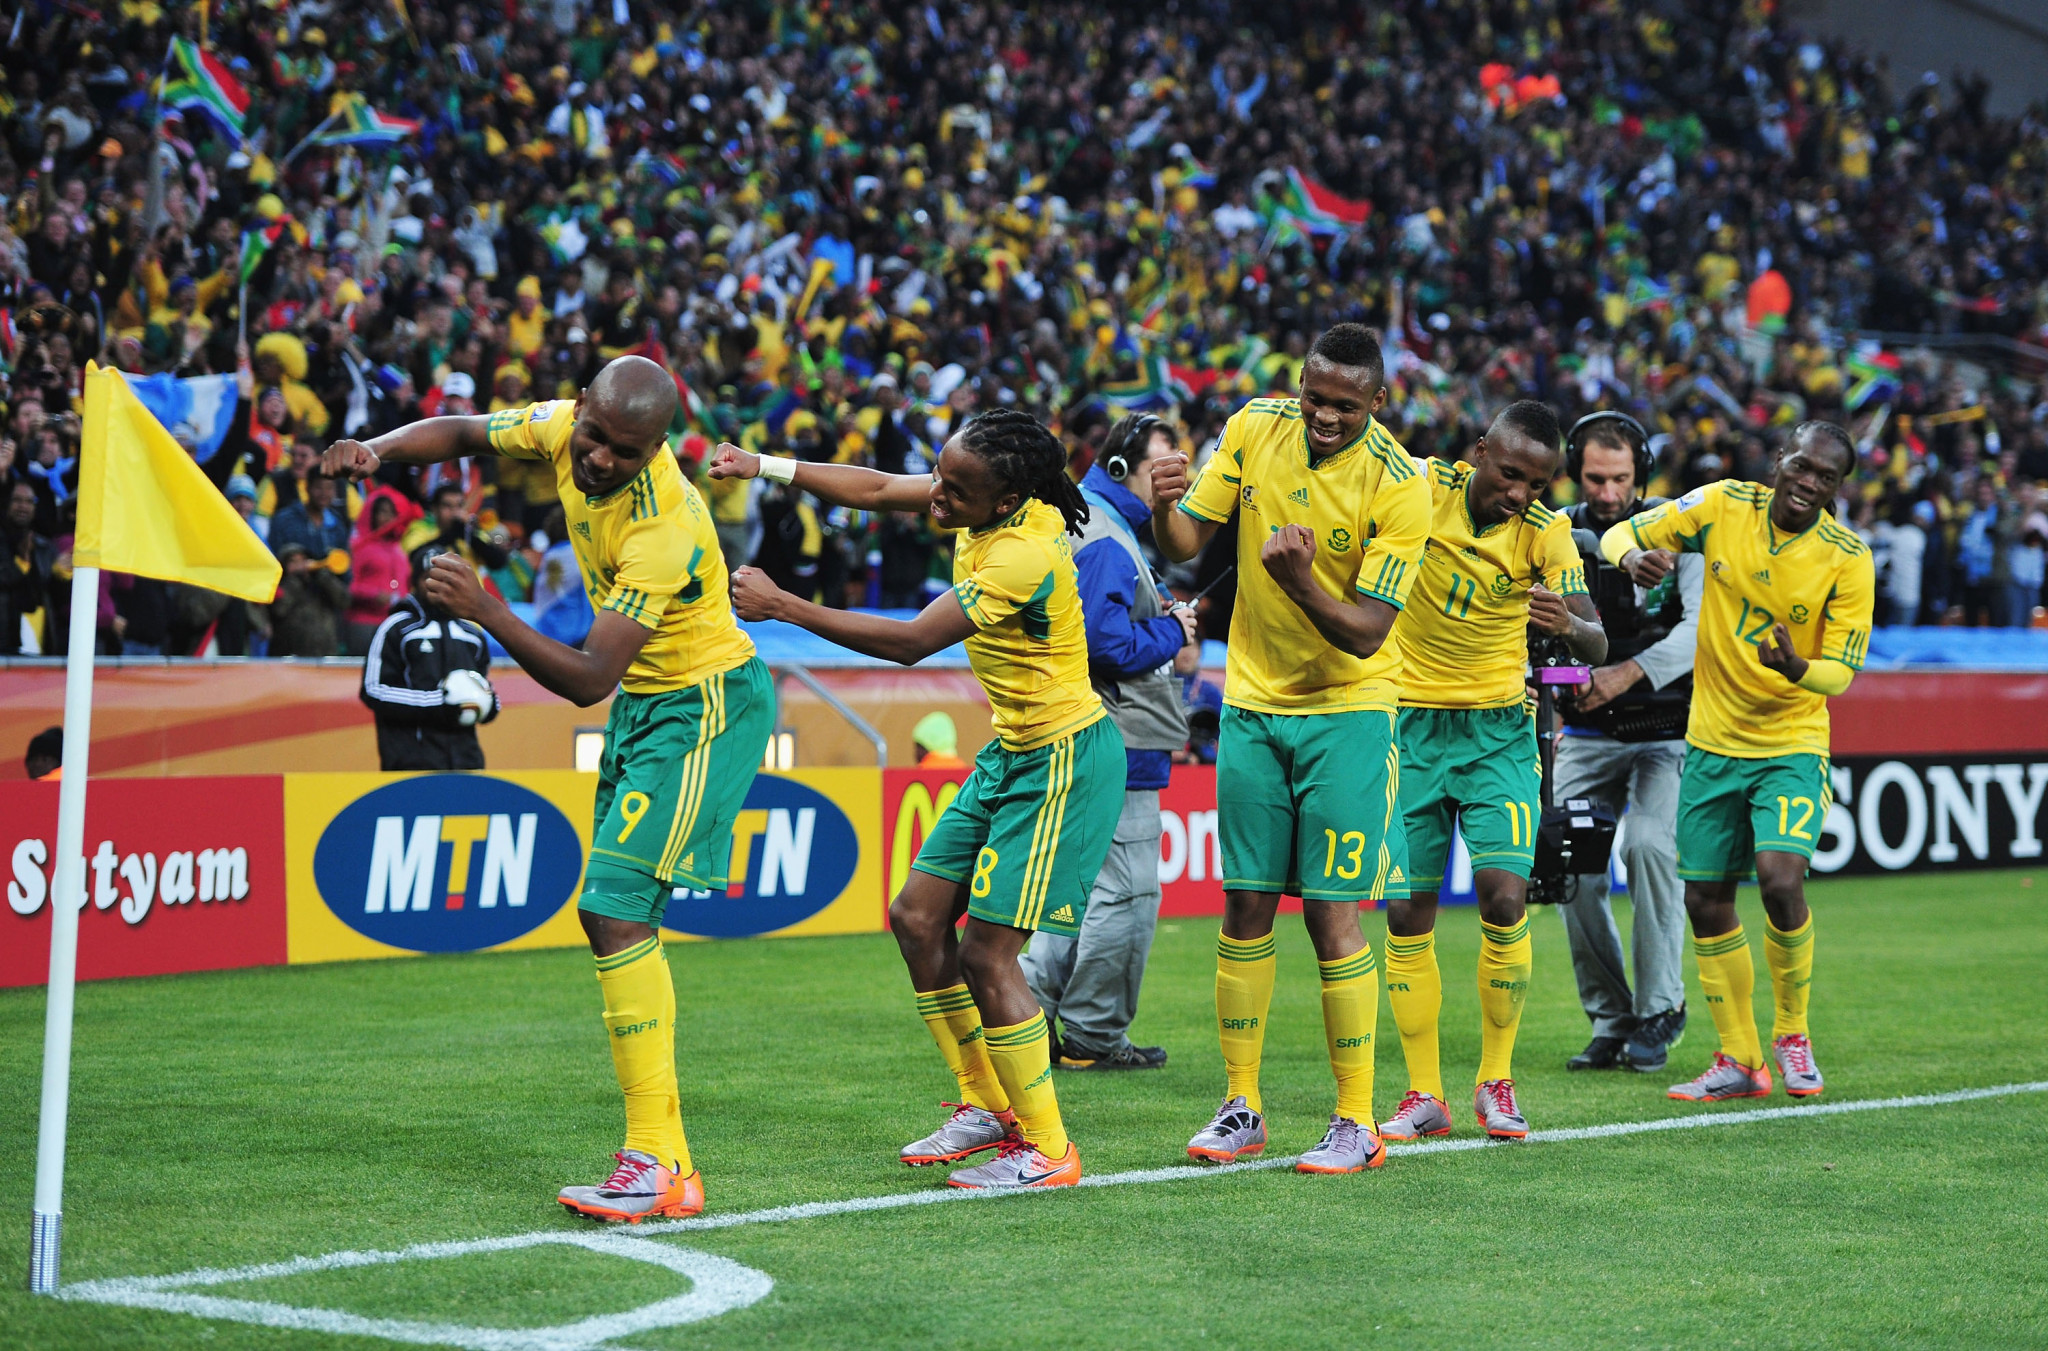 South Africa staged the men's FIFA World Cup in 2010  ©Getty Images